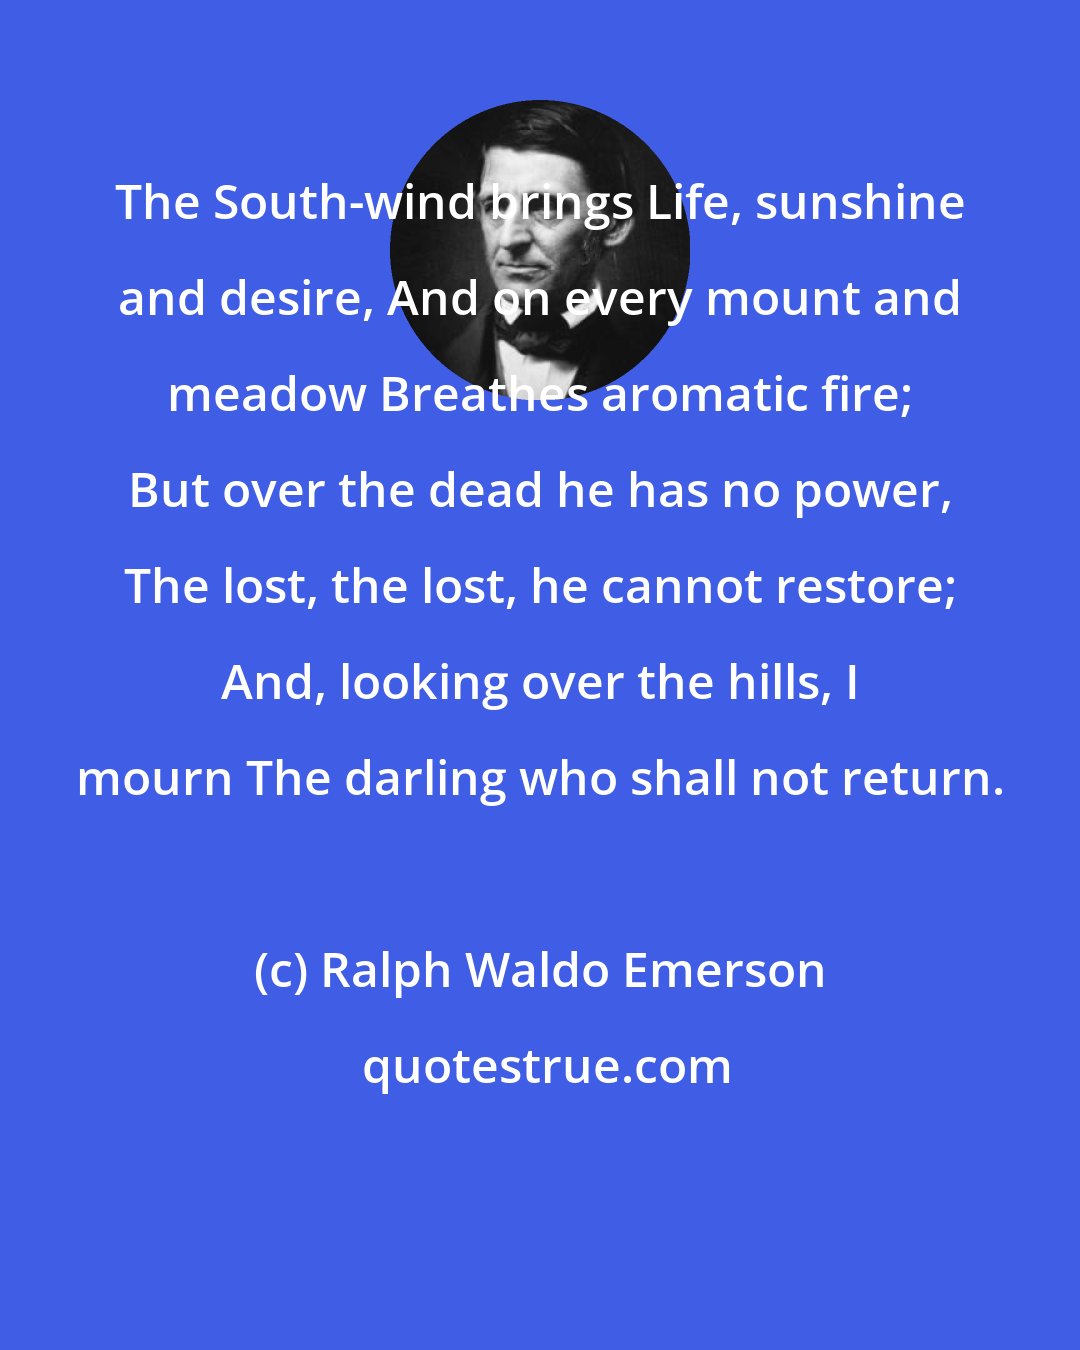 Ralph Waldo Emerson: The South-wind brings Life, sunshine and desire, And on every mount and meadow Breathes aromatic fire; But over the dead he has no power, The lost, the lost, he cannot restore; And, looking over the hills, I mourn The darling who shall not return.